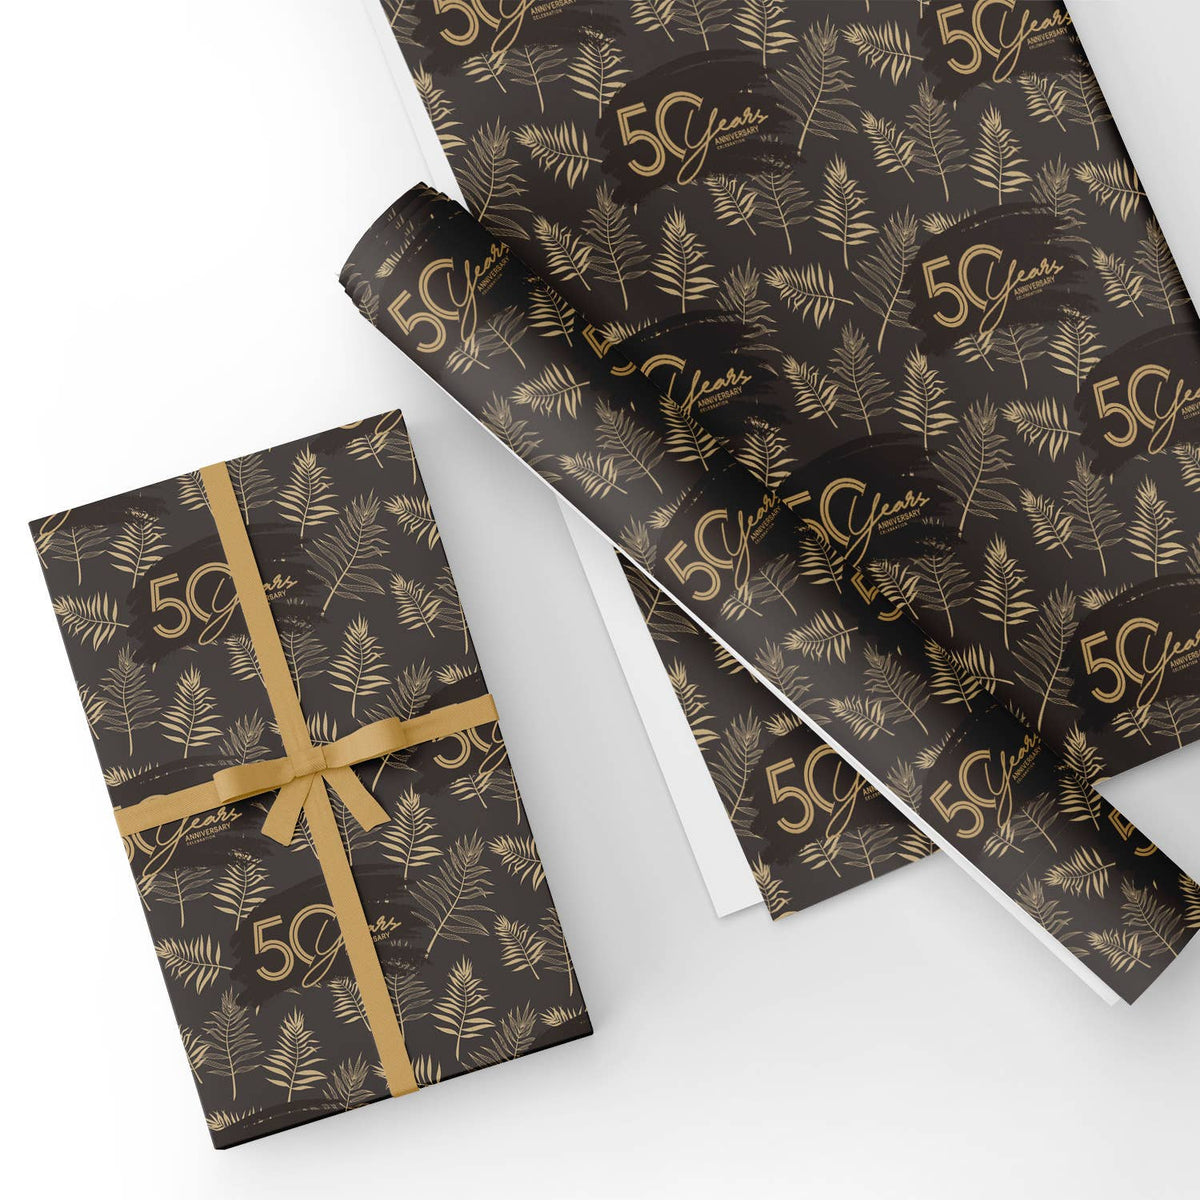 Custom Gift Wrapping Paper Sheets for 50th Birthday - Black and Gold